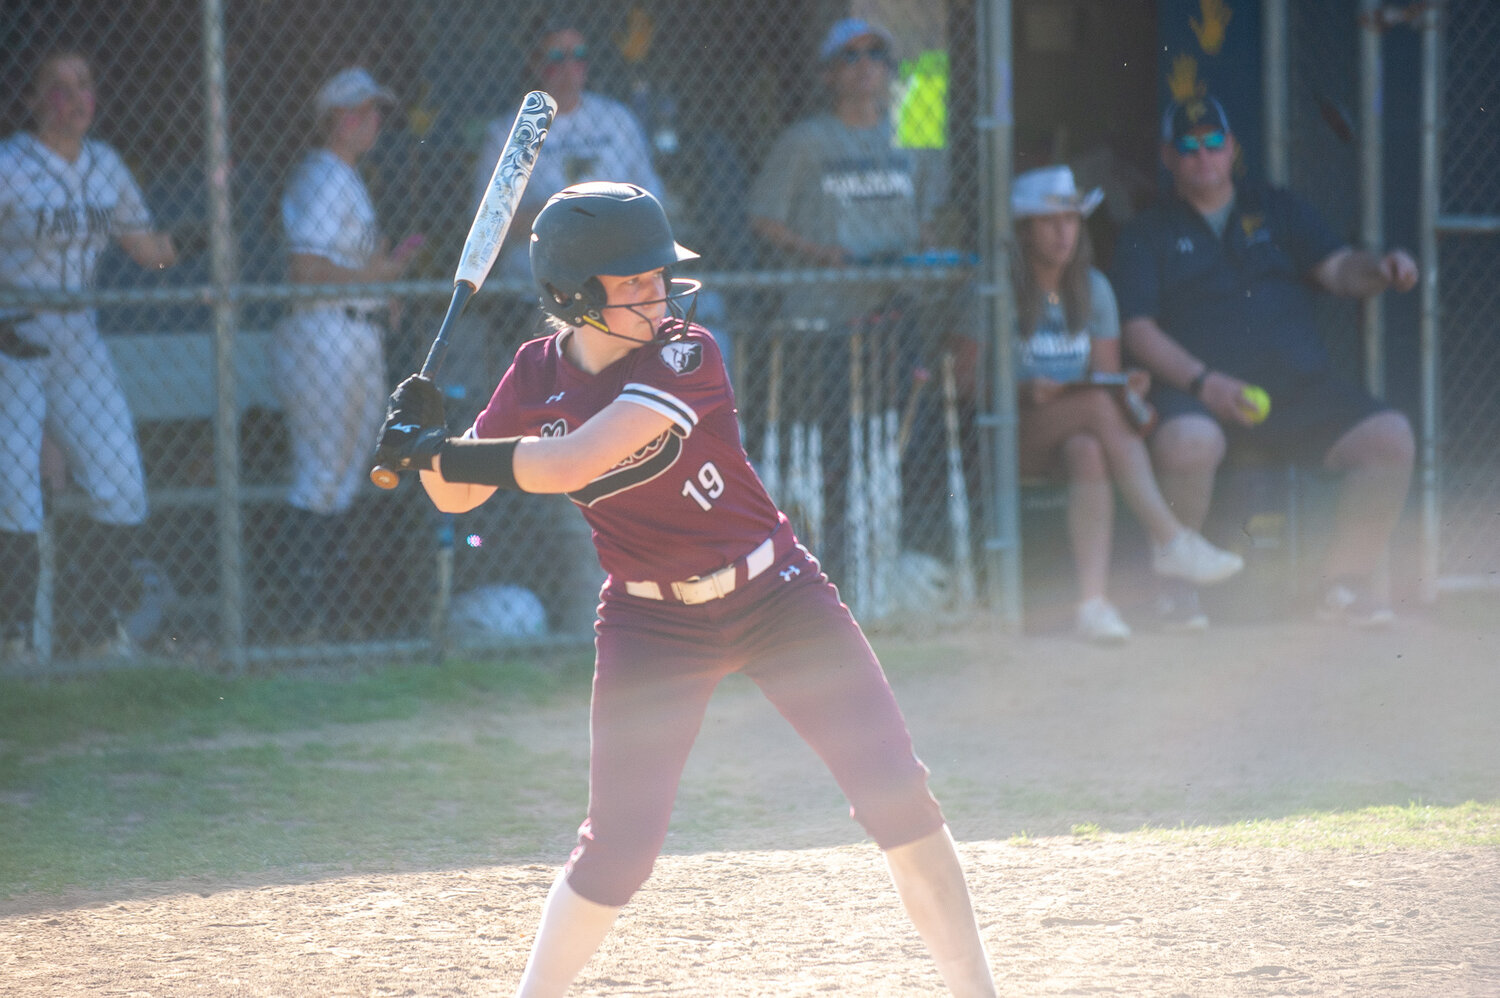 Abby Favazza had a double and a run scored in Broadneck’s win over Severna Park.